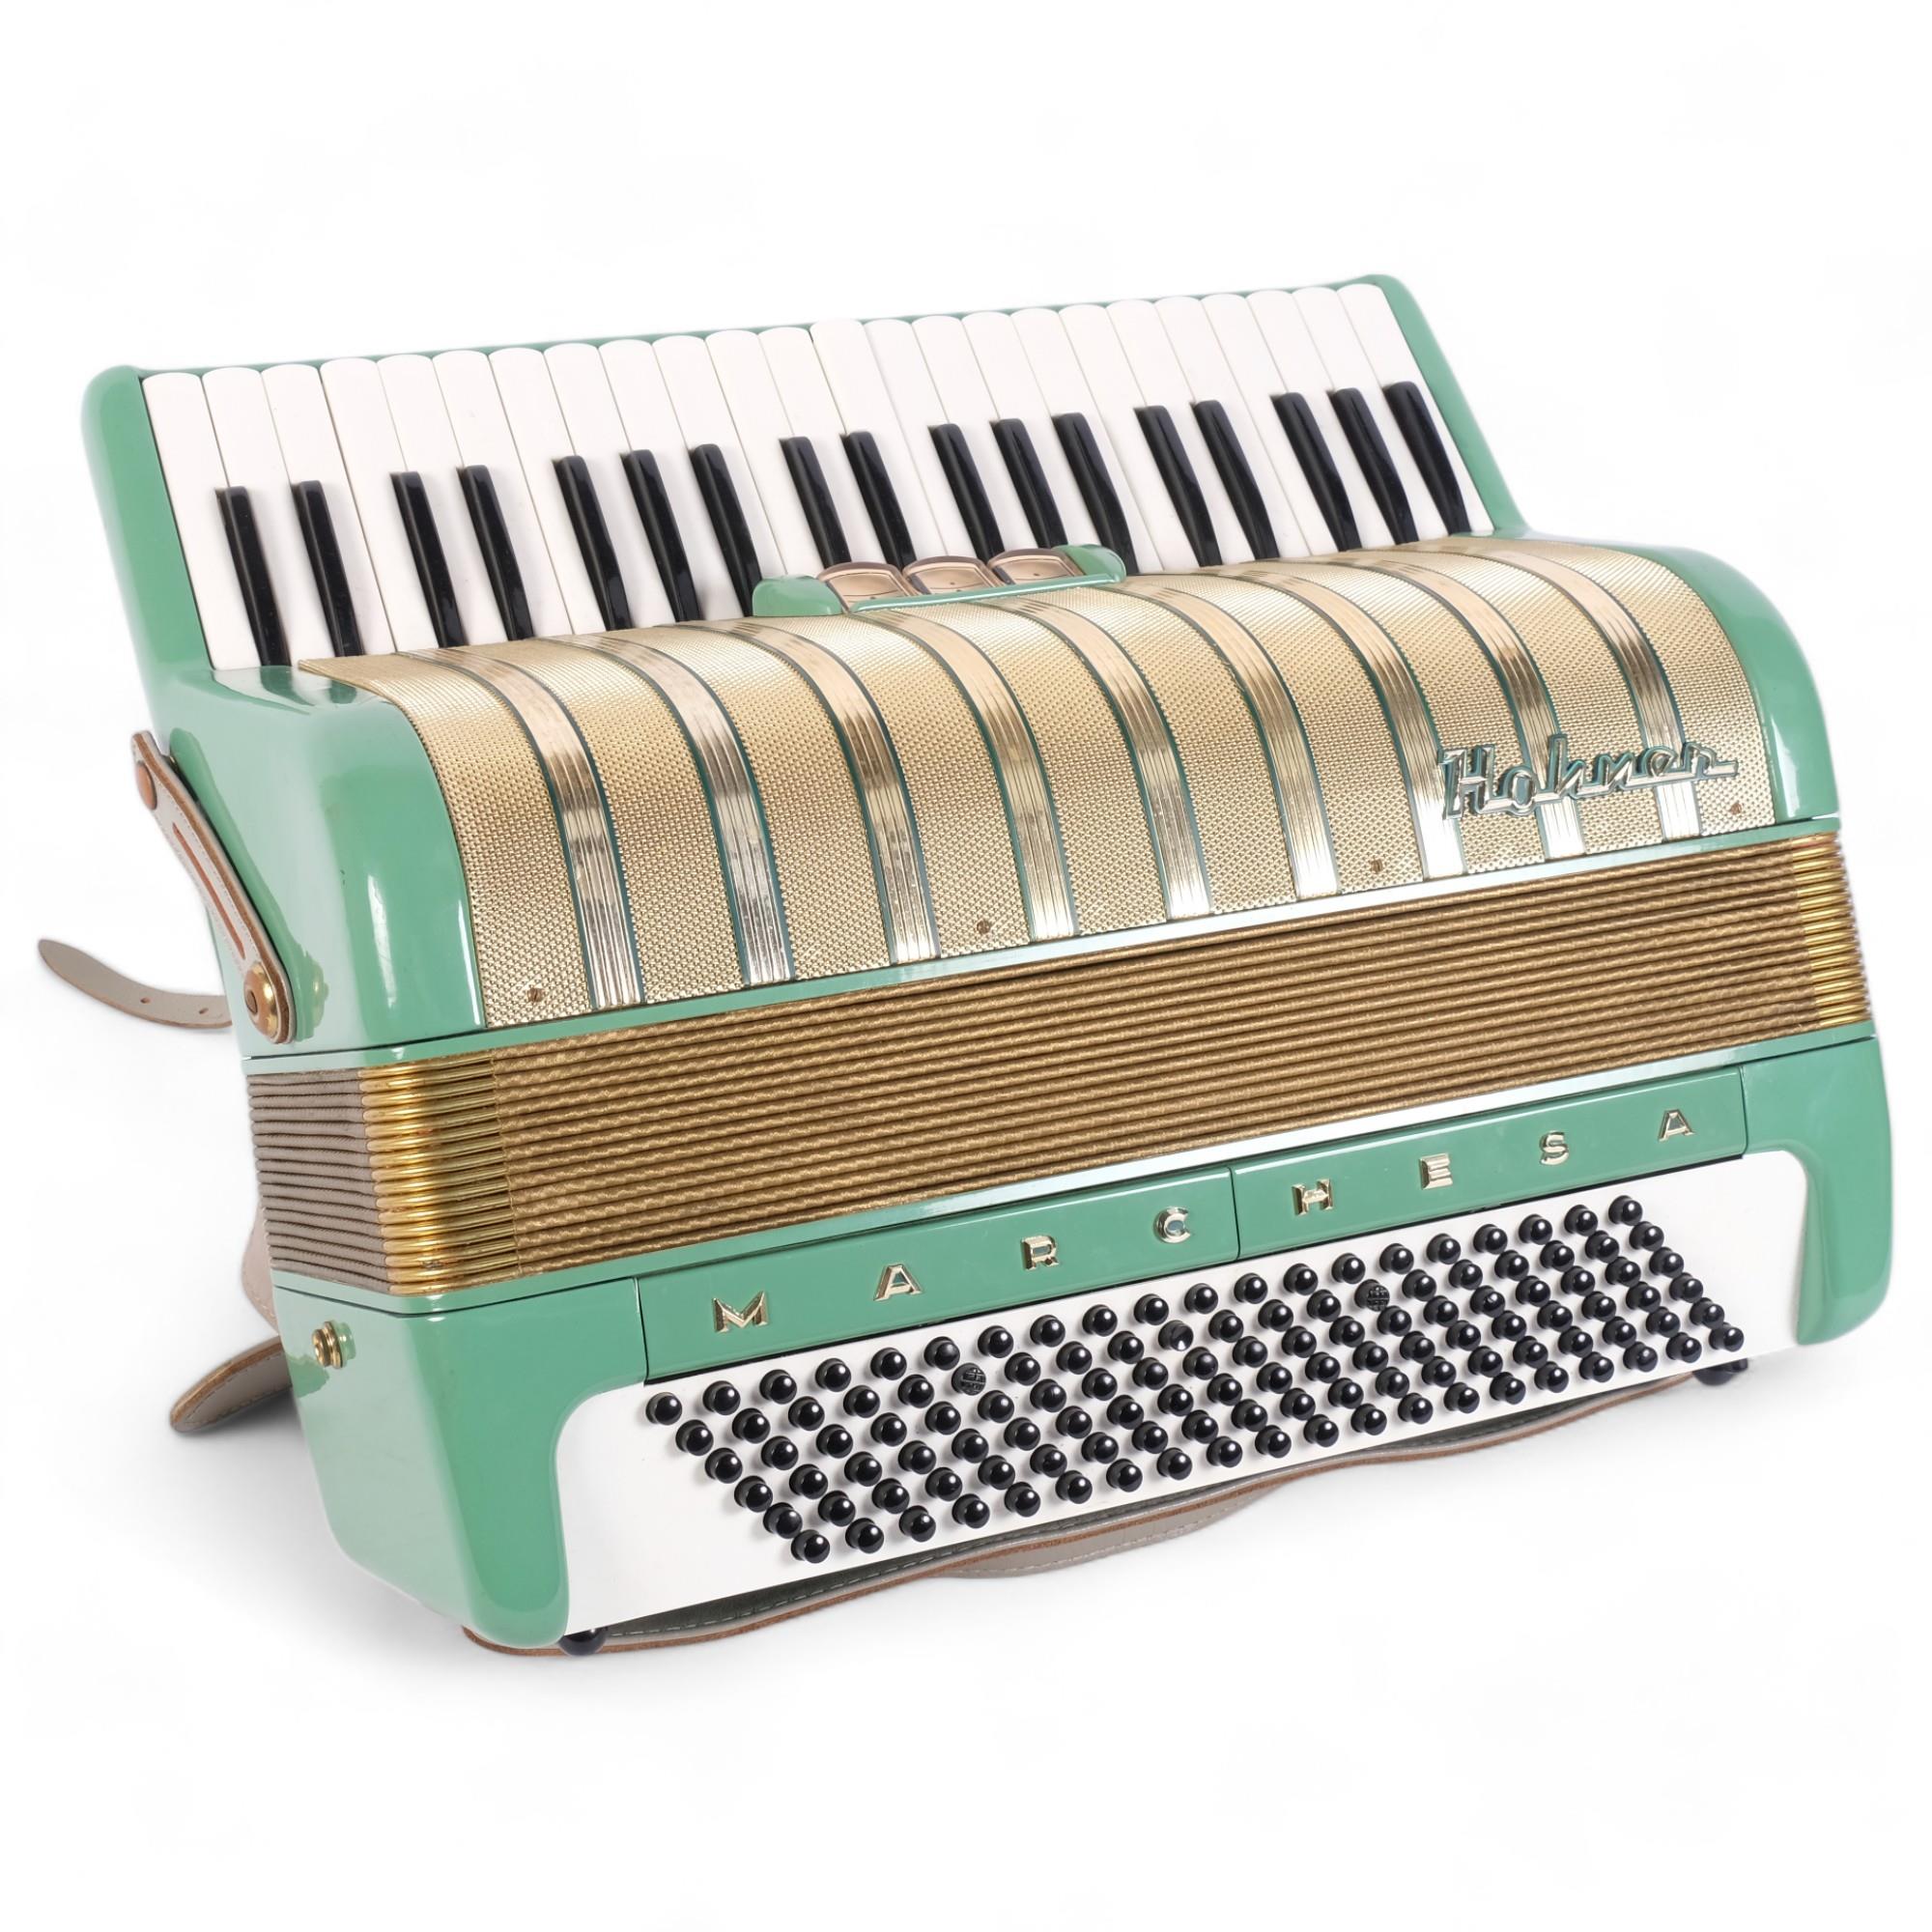 A Hohner, 'Marchesa', piano accordion, 120 button, in original hard shell case, with associated